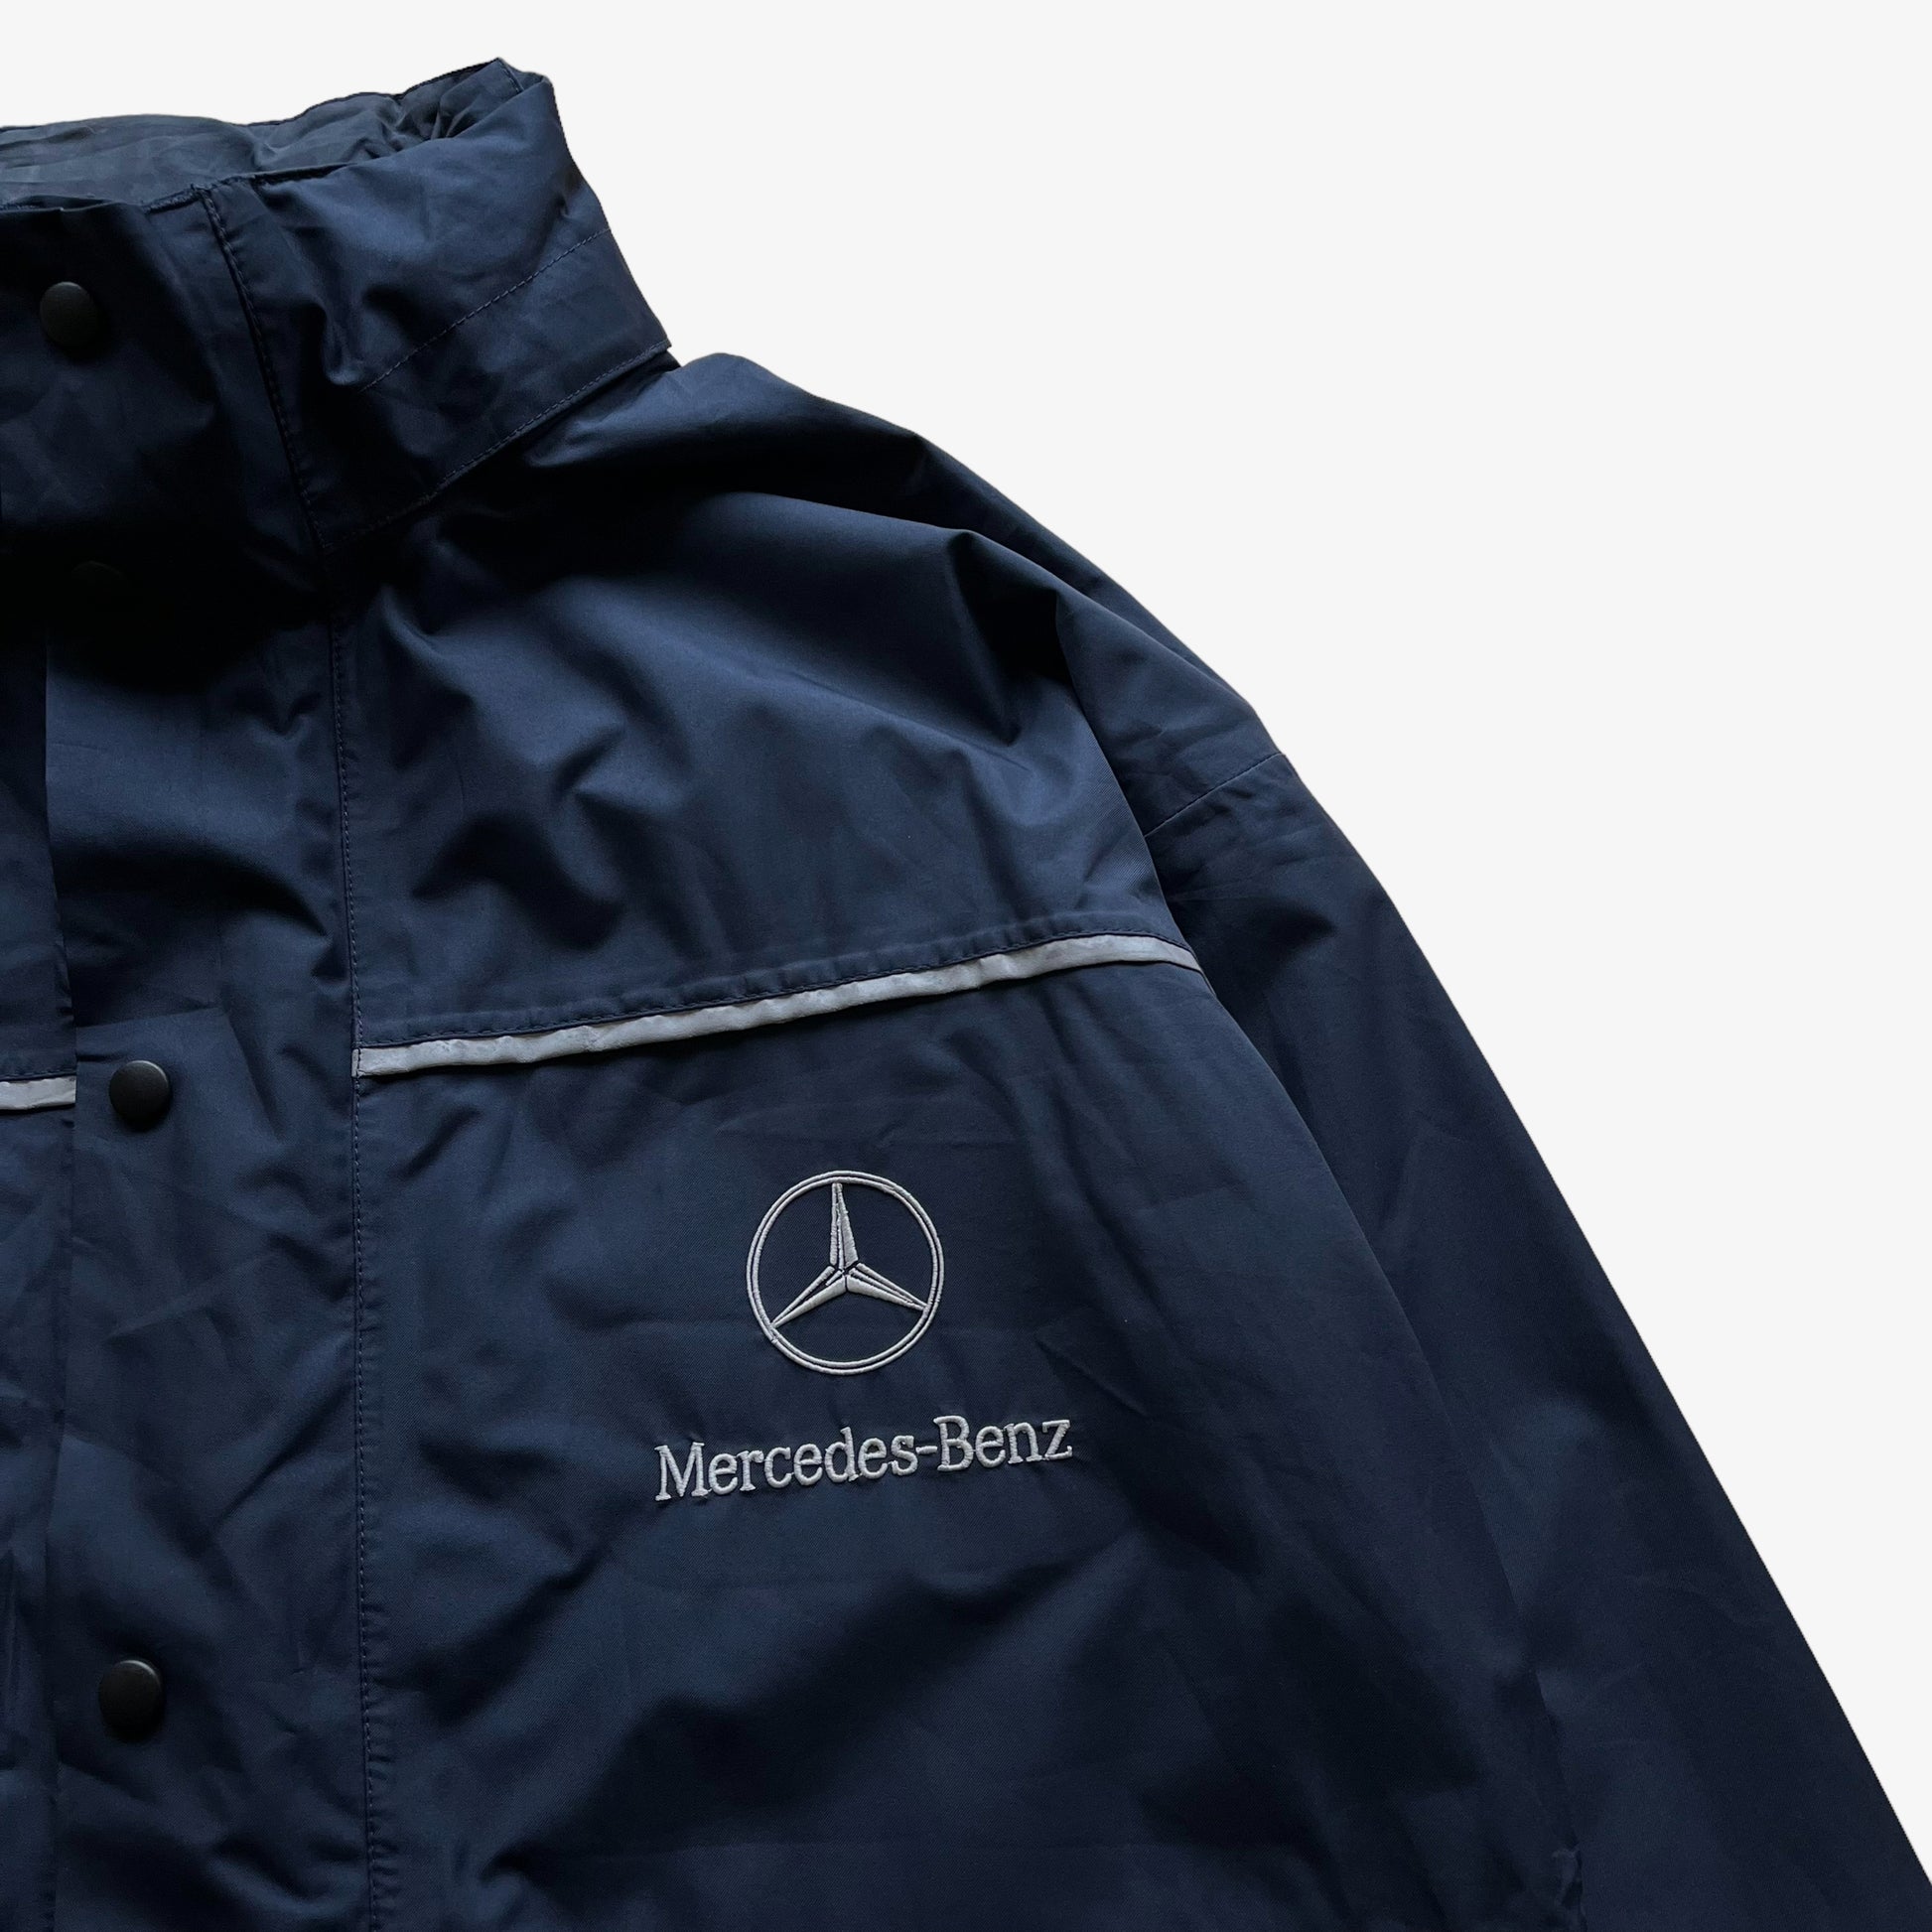 Vintage 90s Mercedes Benz Service Jacket With Back Spell Out Logo - Casspios Dream